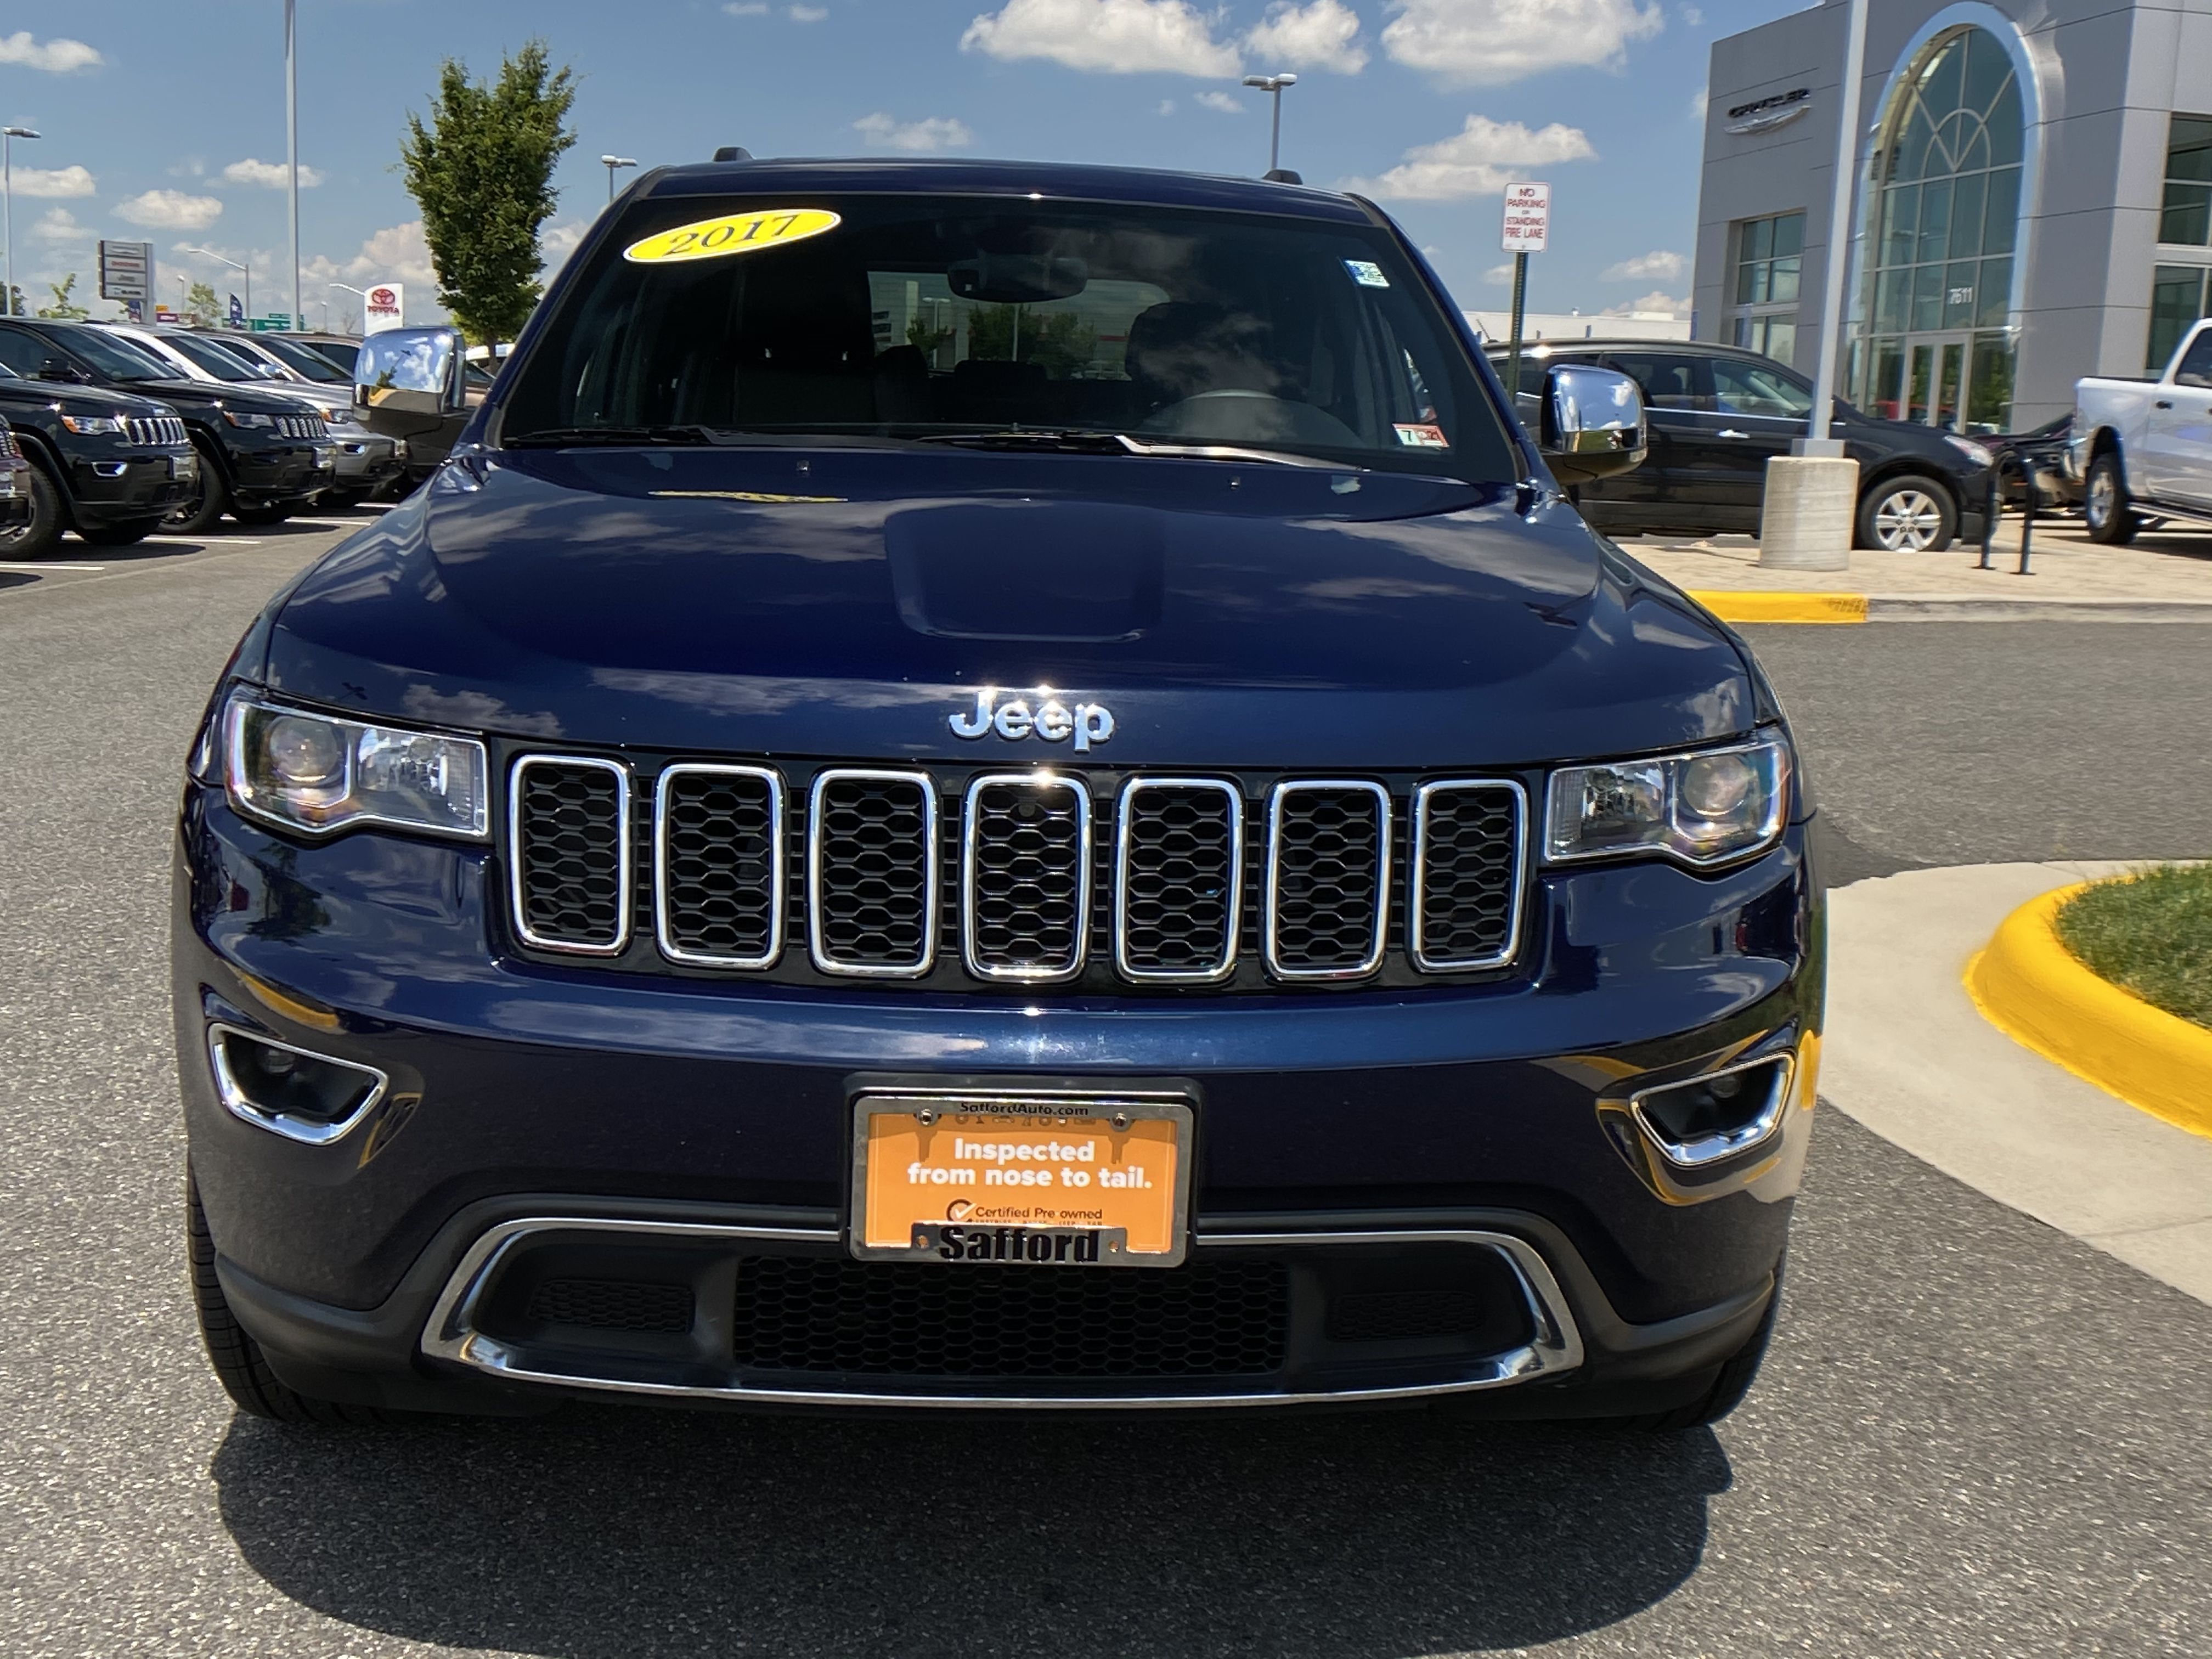 PreOwned 2017 Jeep Grand Cherokee Limited 4×4